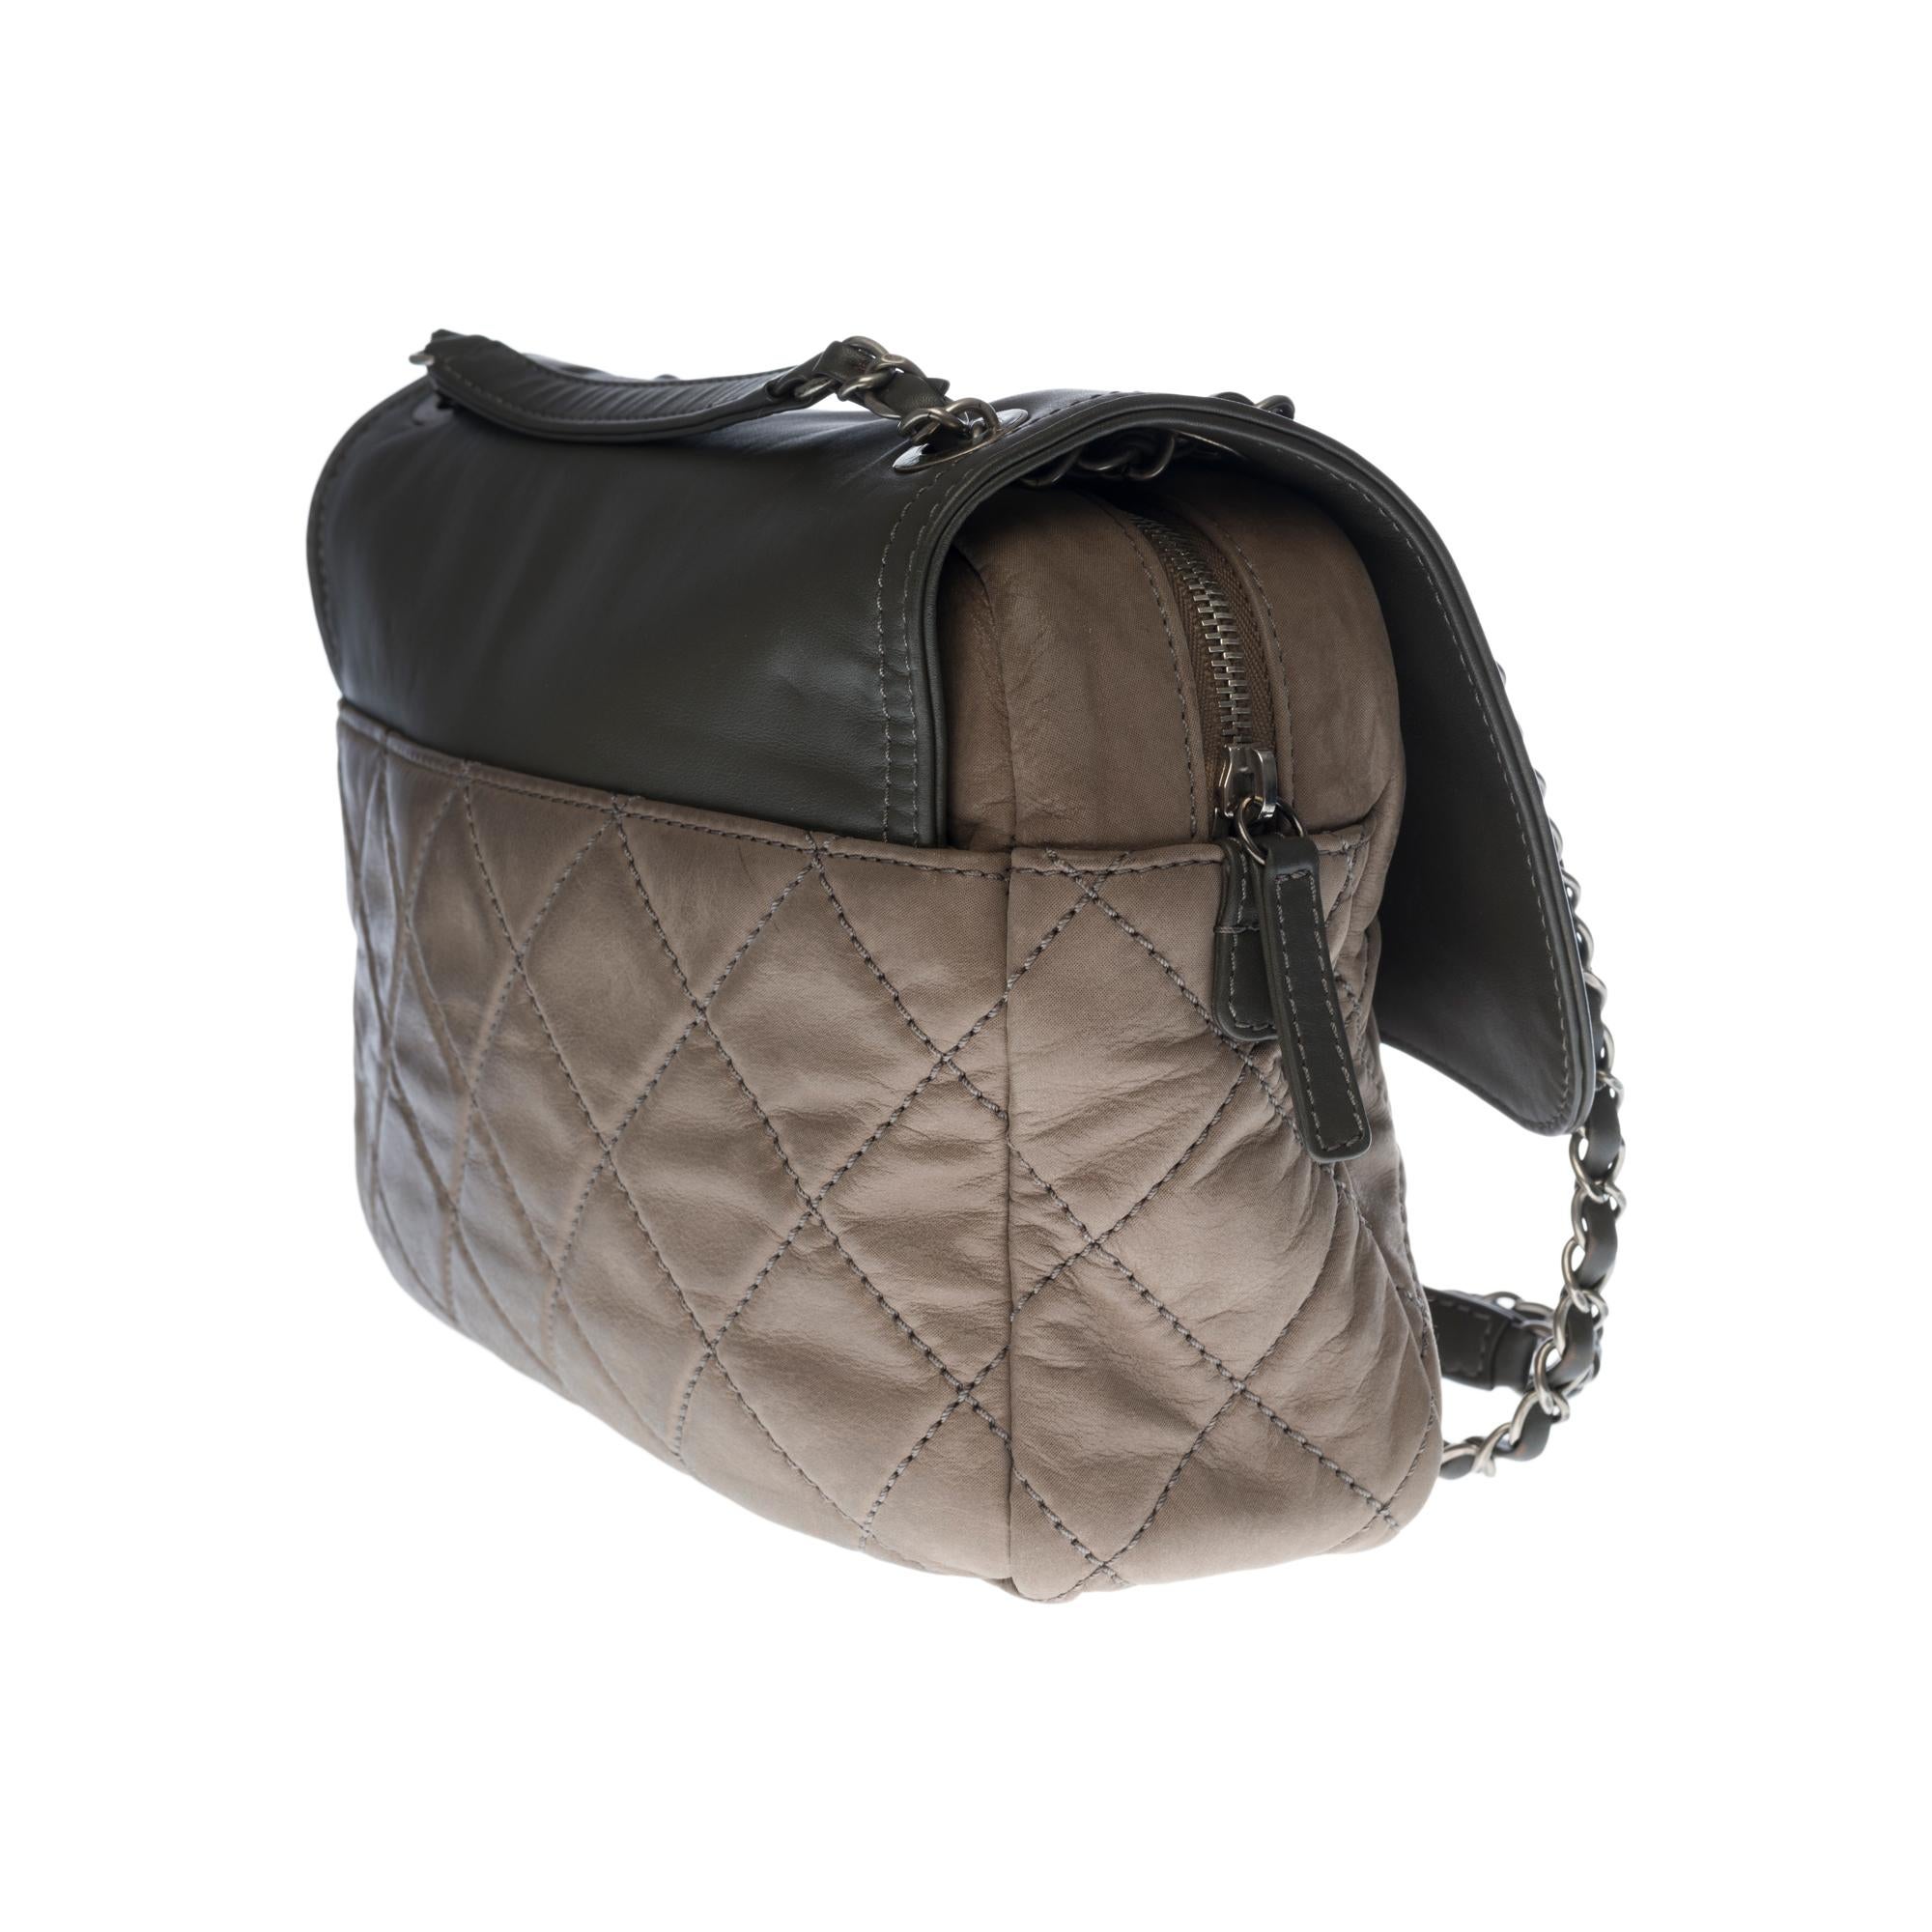 Black Chanel Classic Flap shoulder bag in grey semi-quilted leather, SHW